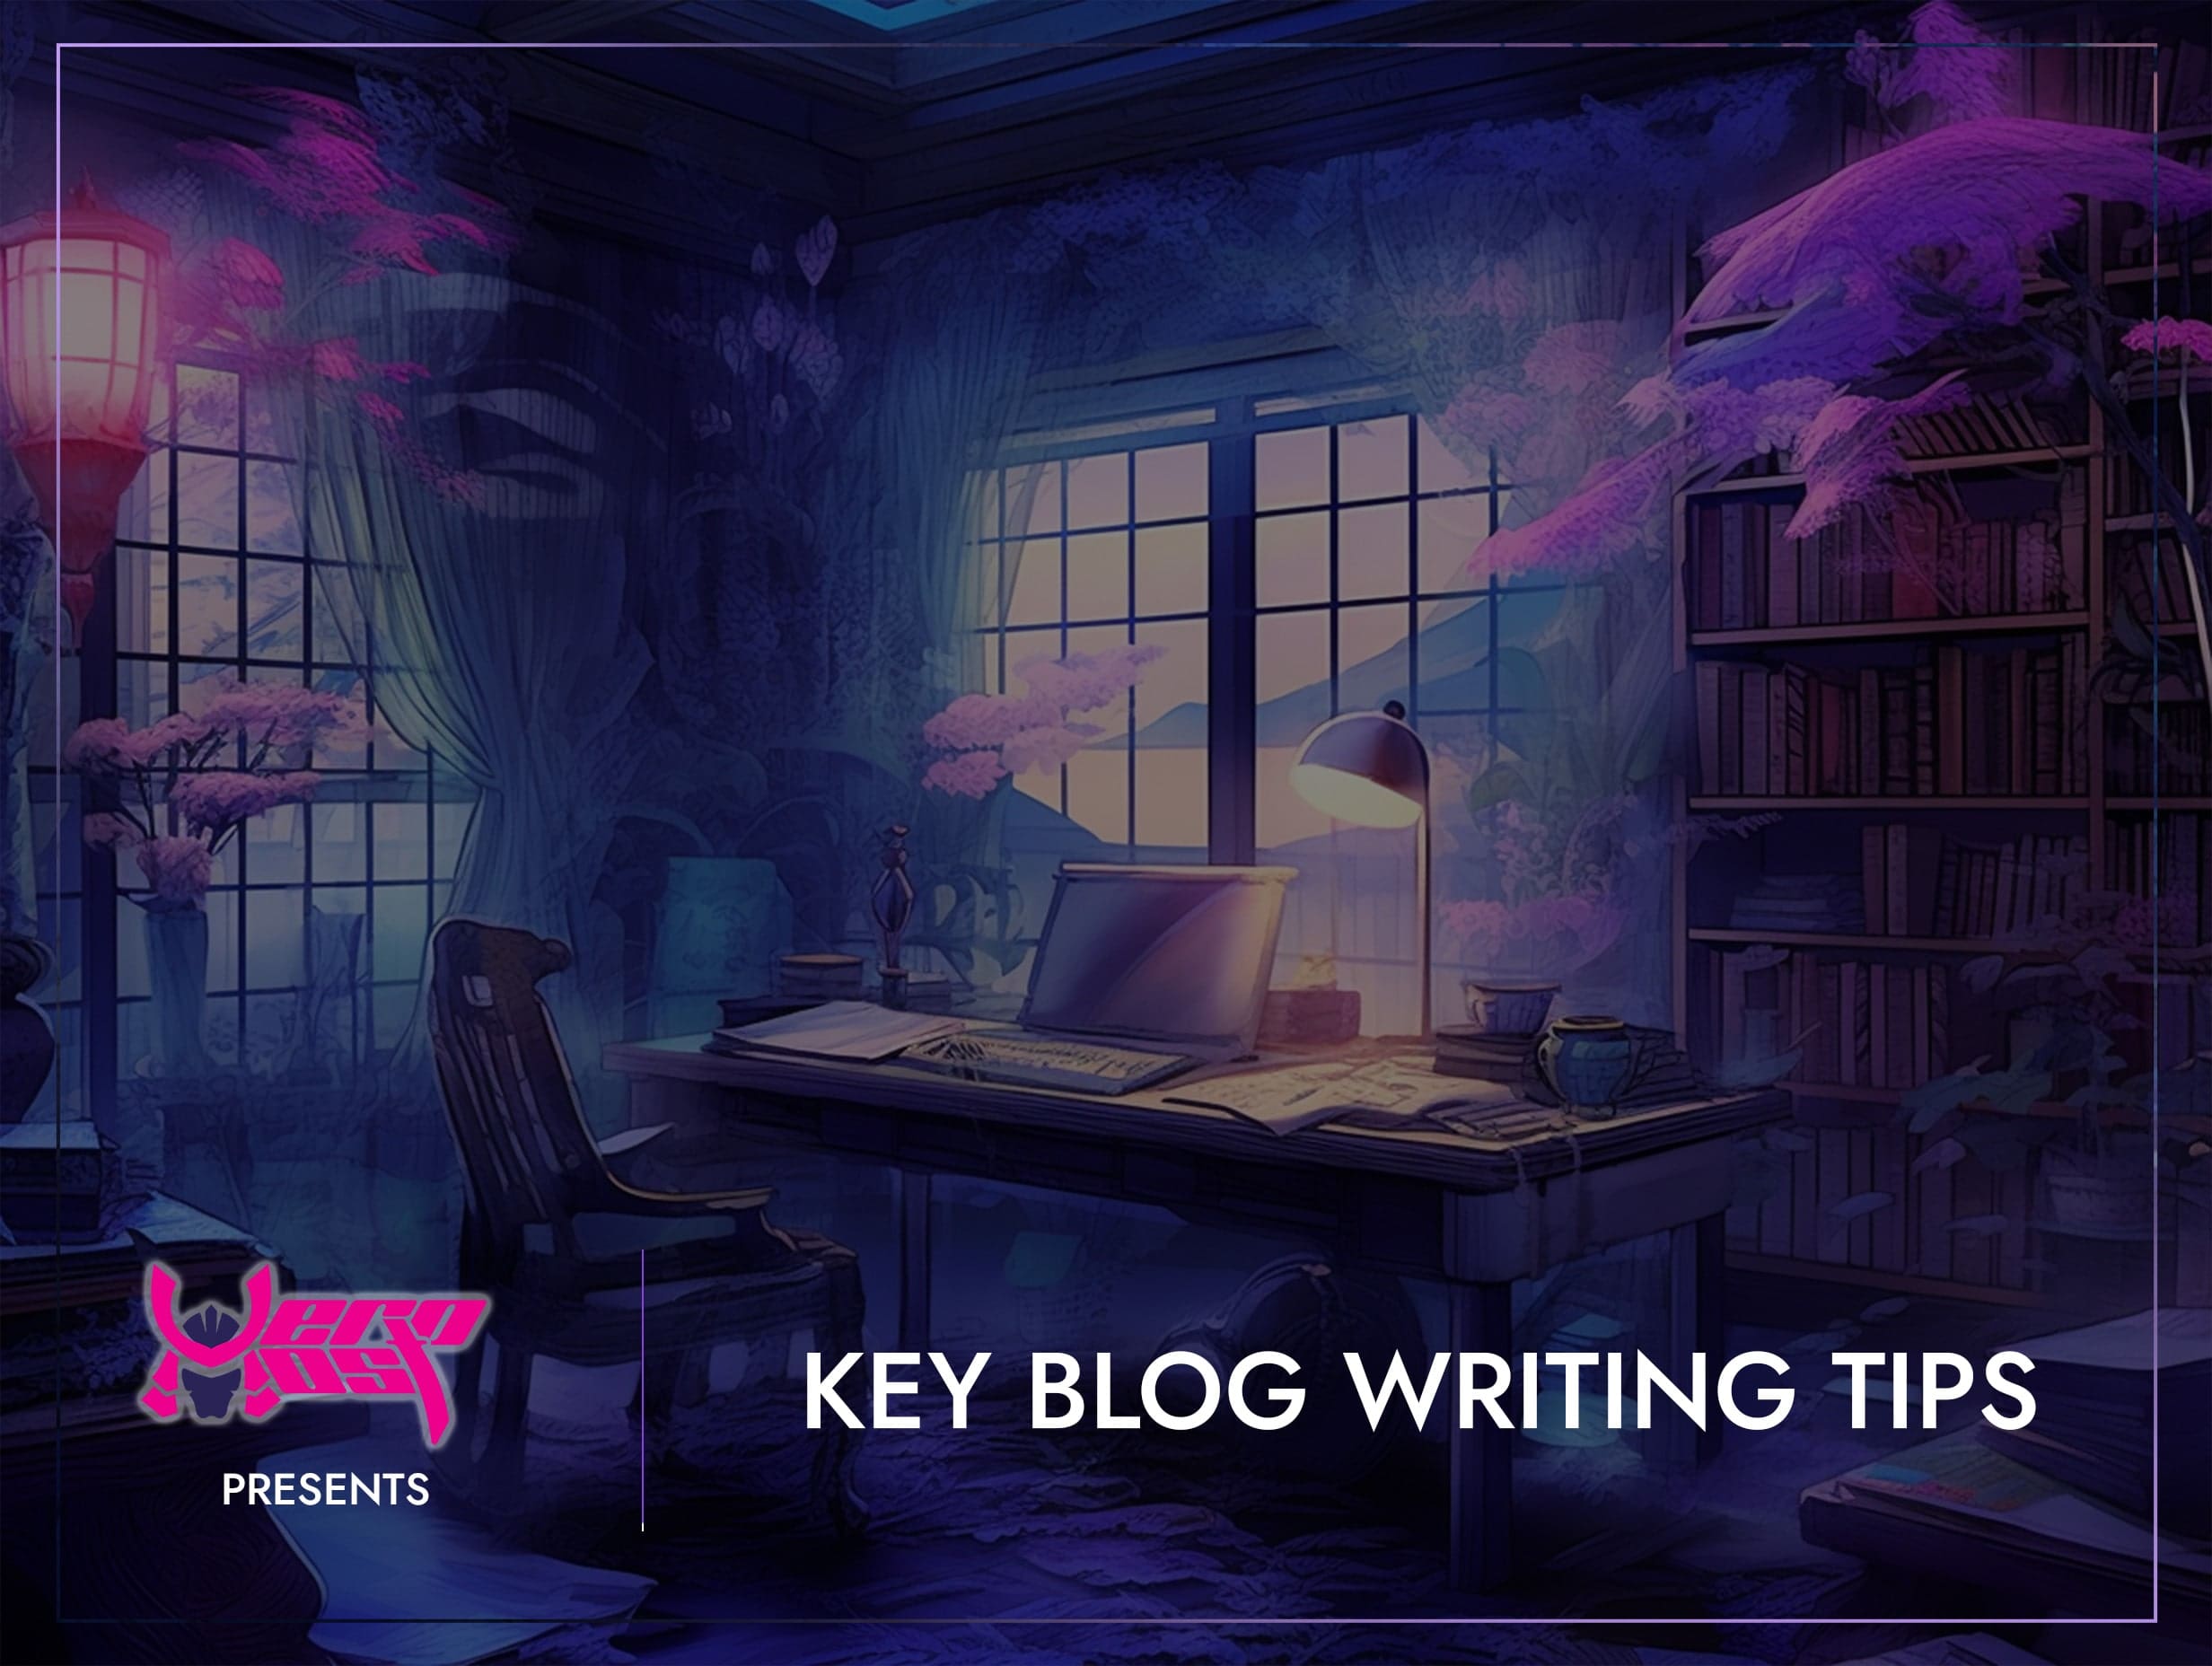 Key Tips for Writing Blogs